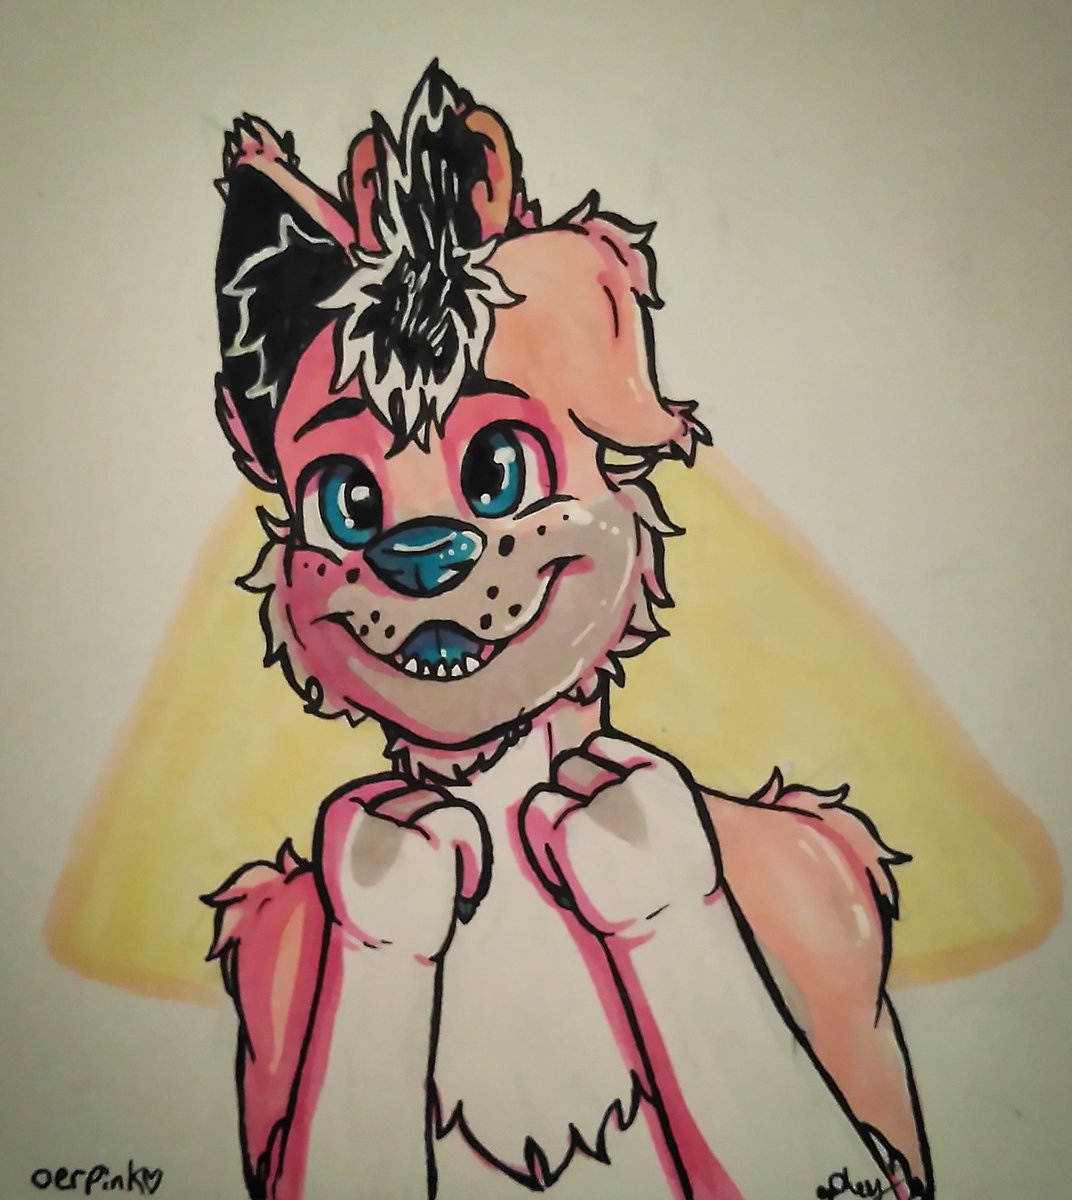 I hope everyone is having a wonderful day today, and if you are not do something that you love to do to cheer you up!
#furry #furryfandom #fursona #furrywolf #character #copicart #copic #art #copicartwork